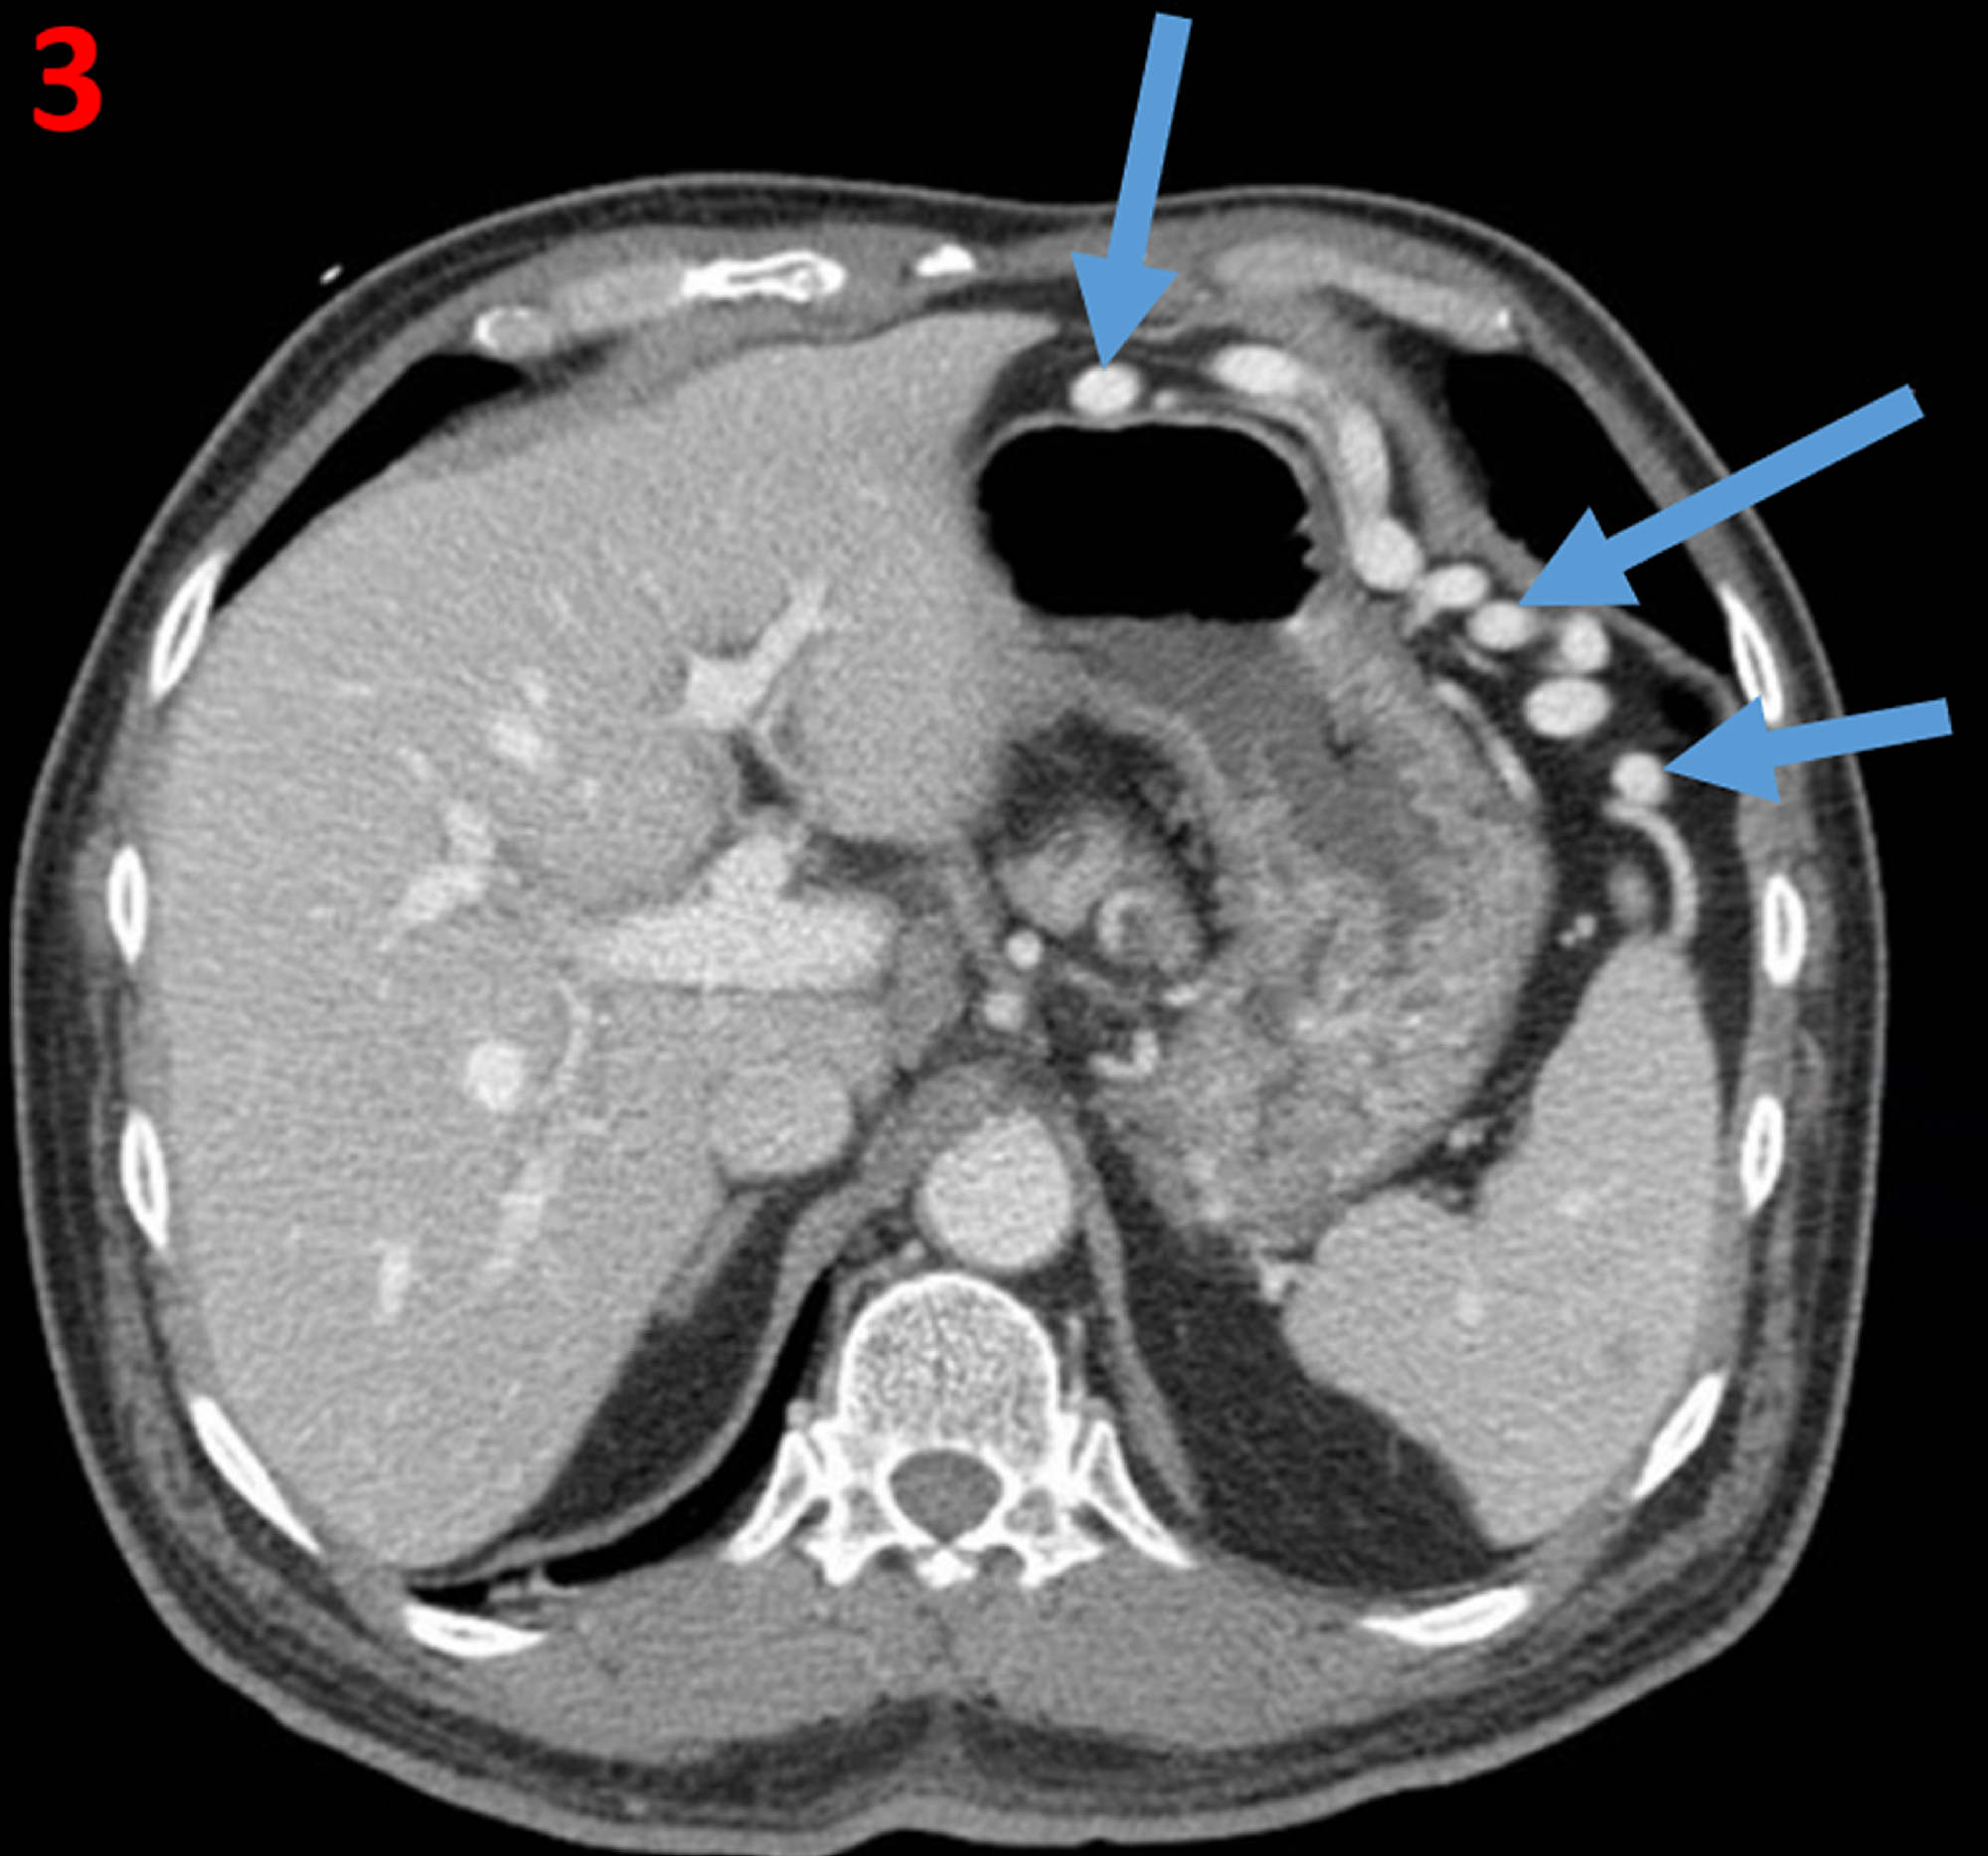 Cureus Vascular Complications Of Splenectomy In A Patient With Gastric Dieulafoy Like Lesions In Left Sided Portal Hypertension Secondary To Splenic Vein And Artery Thrombosis